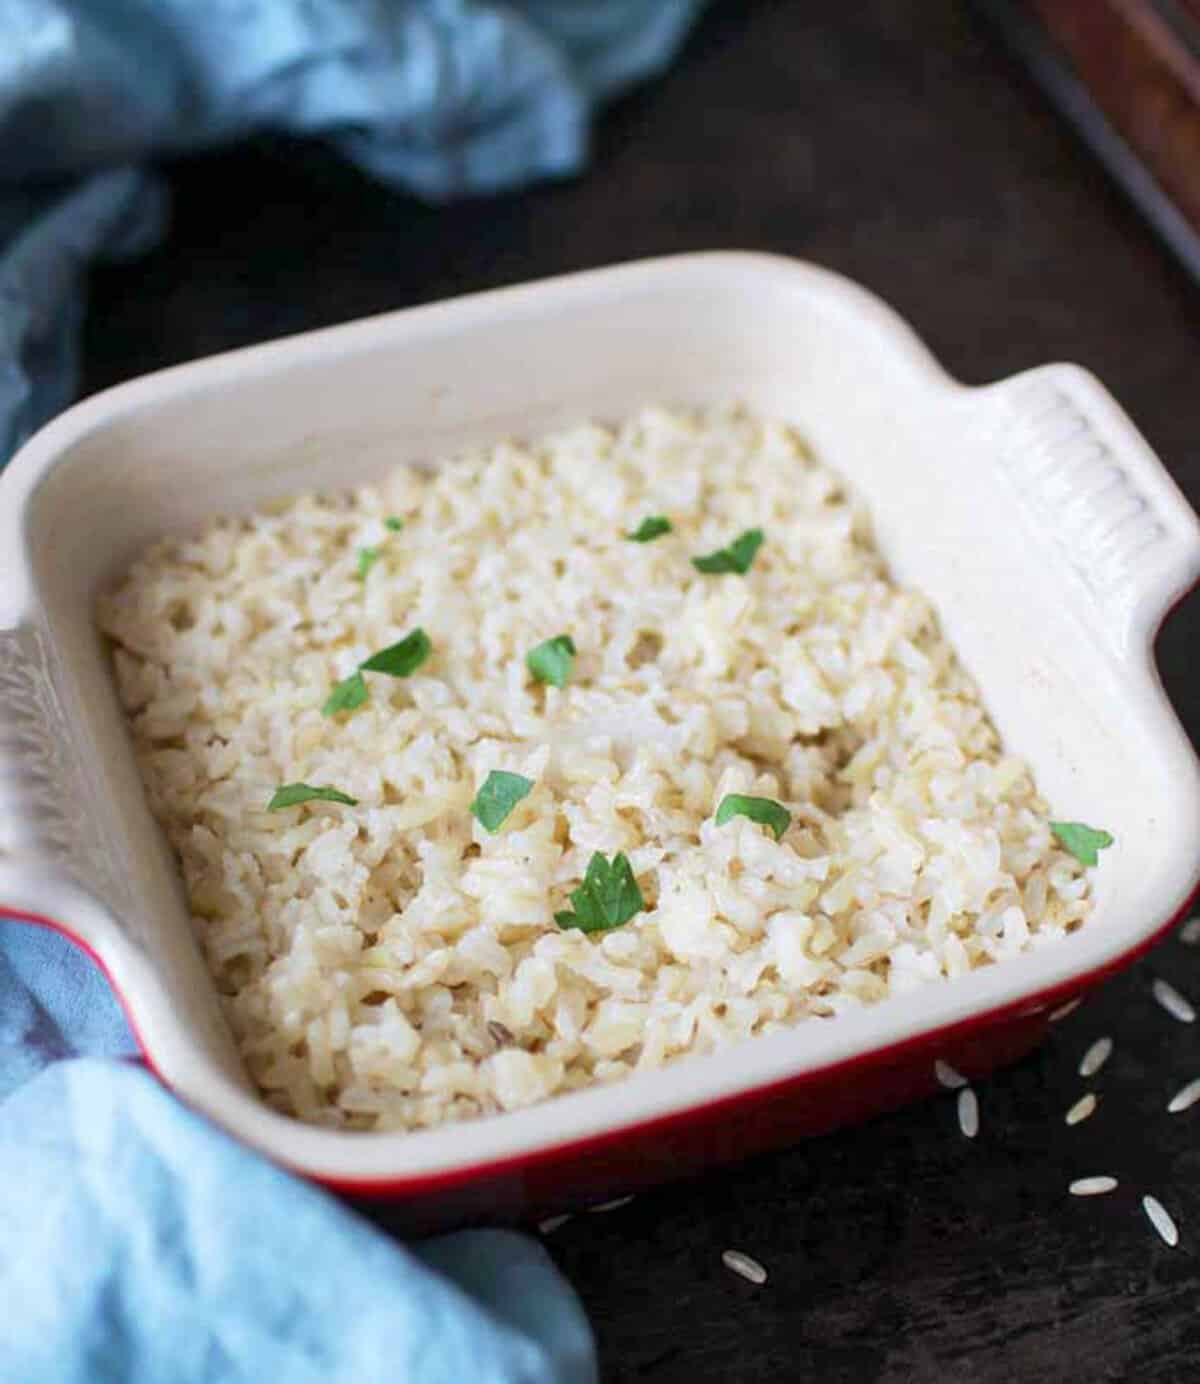 baked brown rice in a red baking dish.